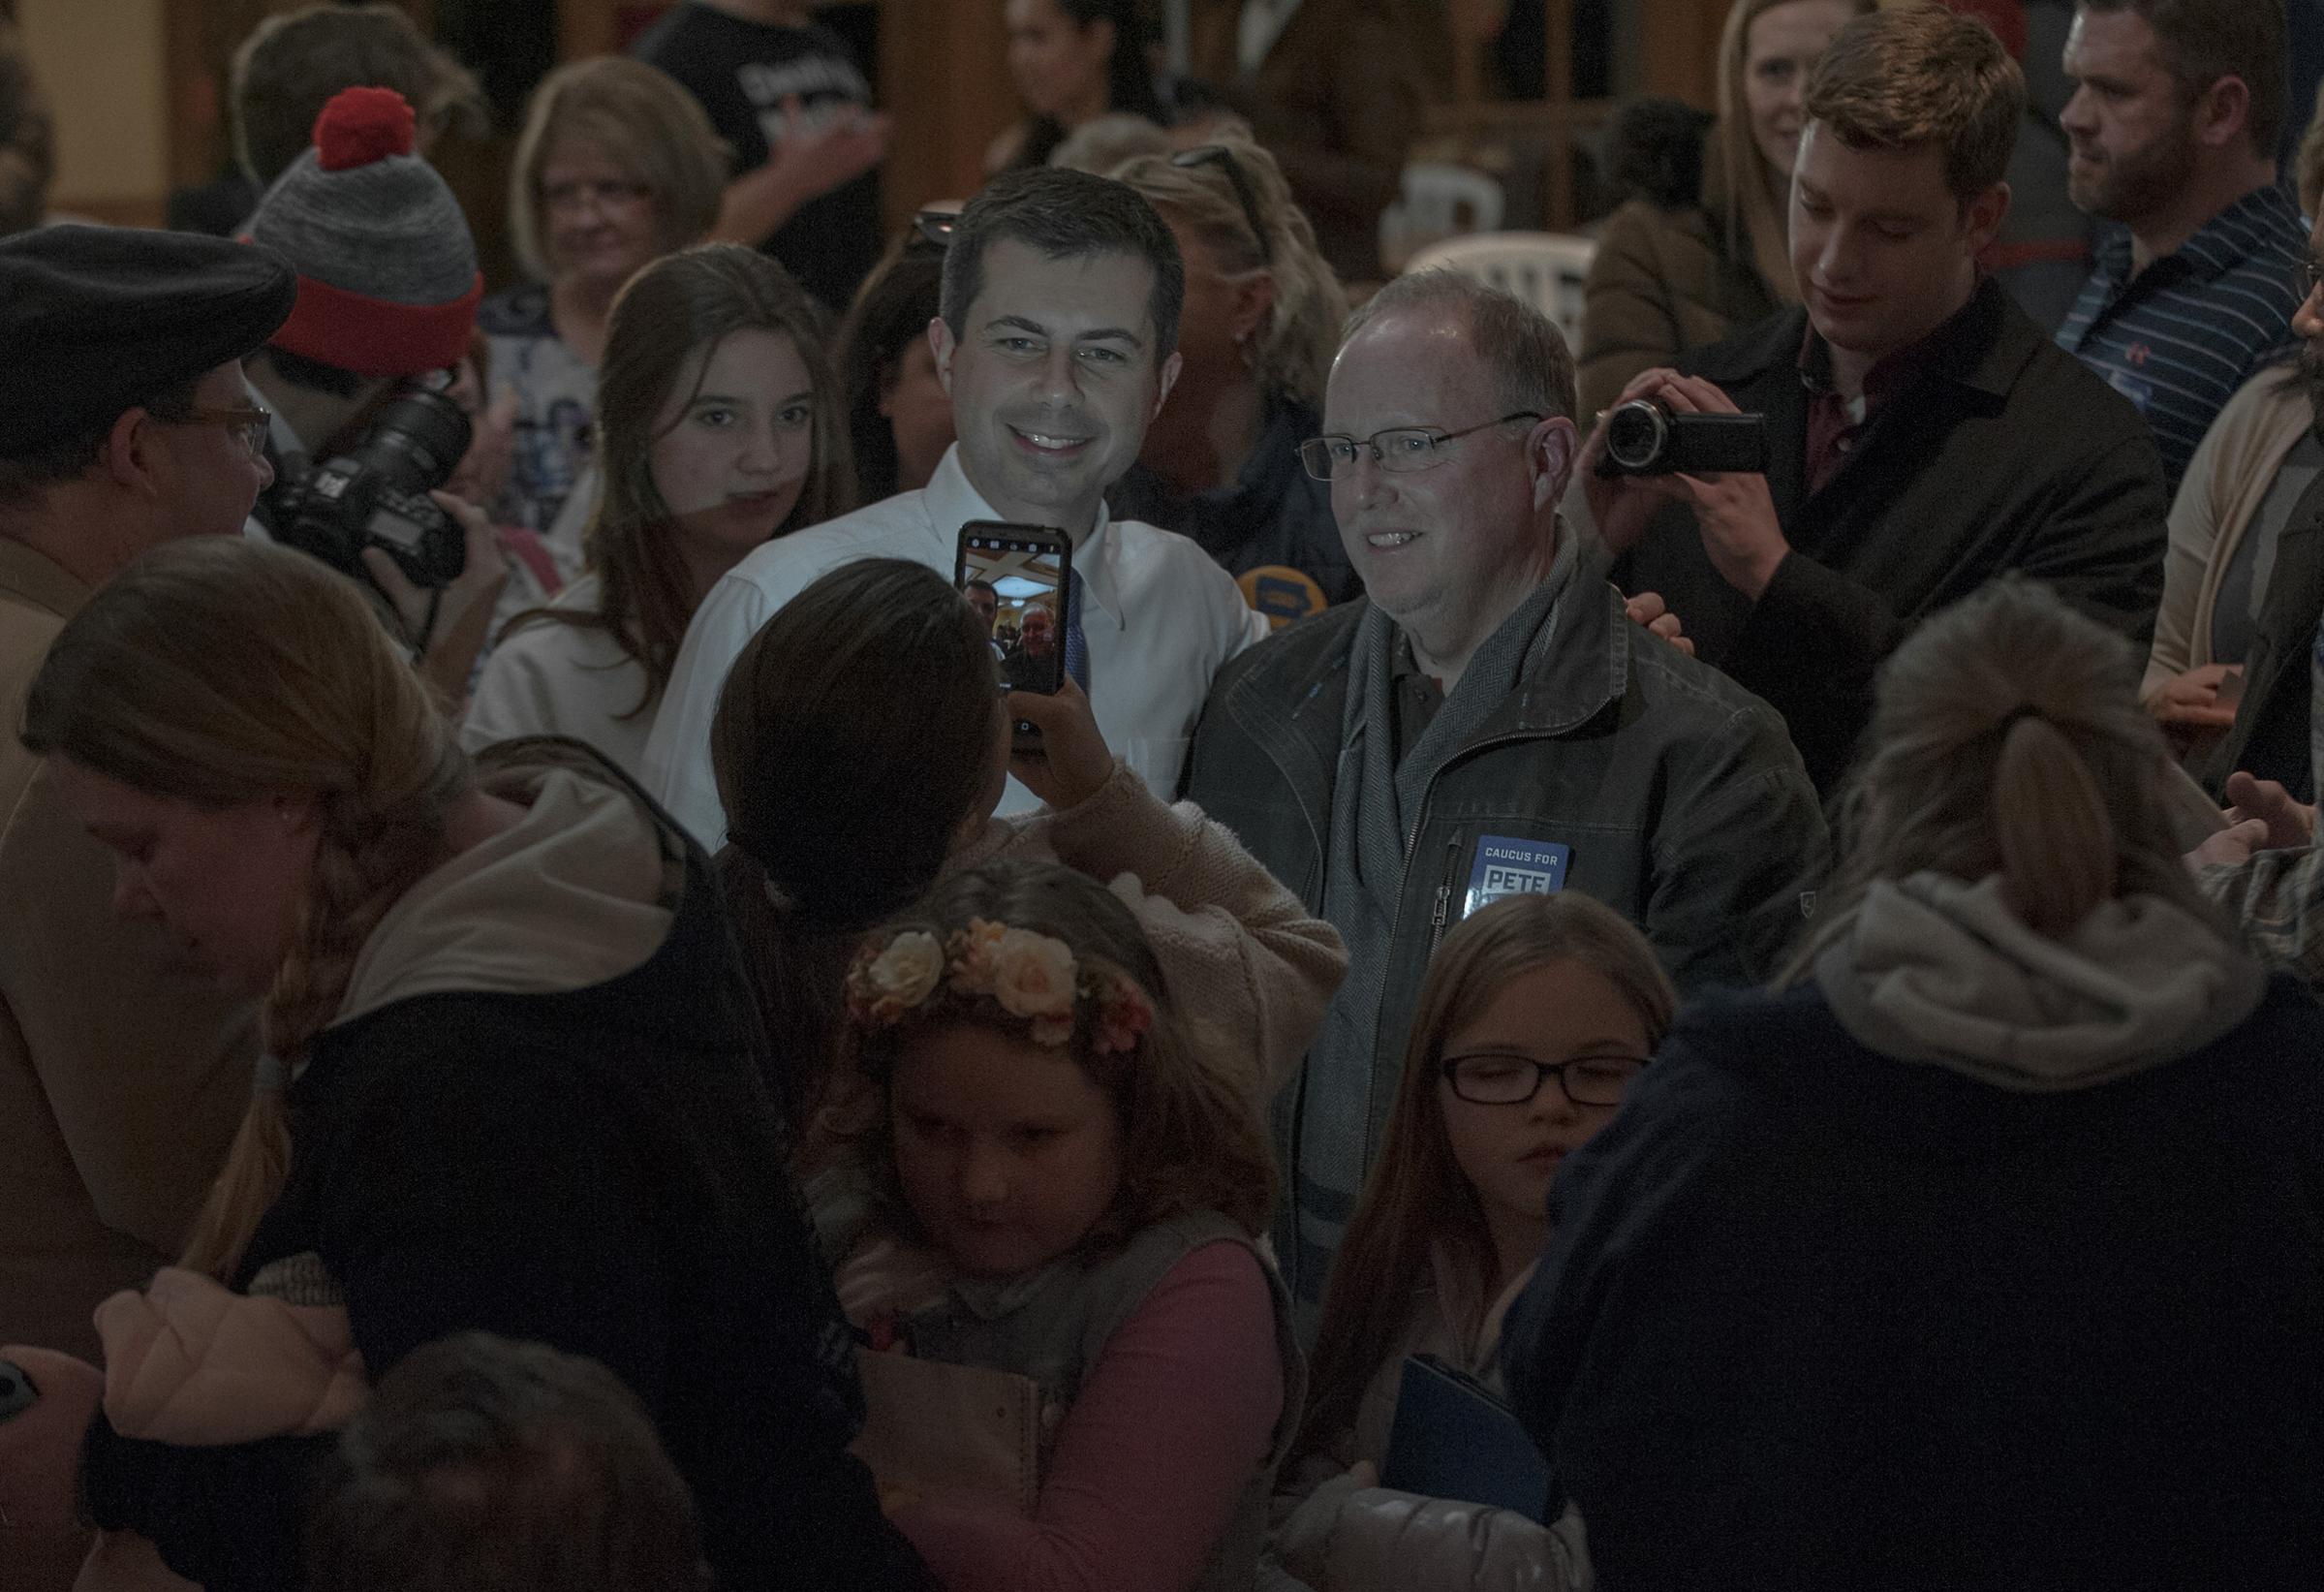 Pete Buttigieg Town Hall in Mason City, IA on Jan. 29, 2020. Photo by September Dawn Bottoms for TIME.